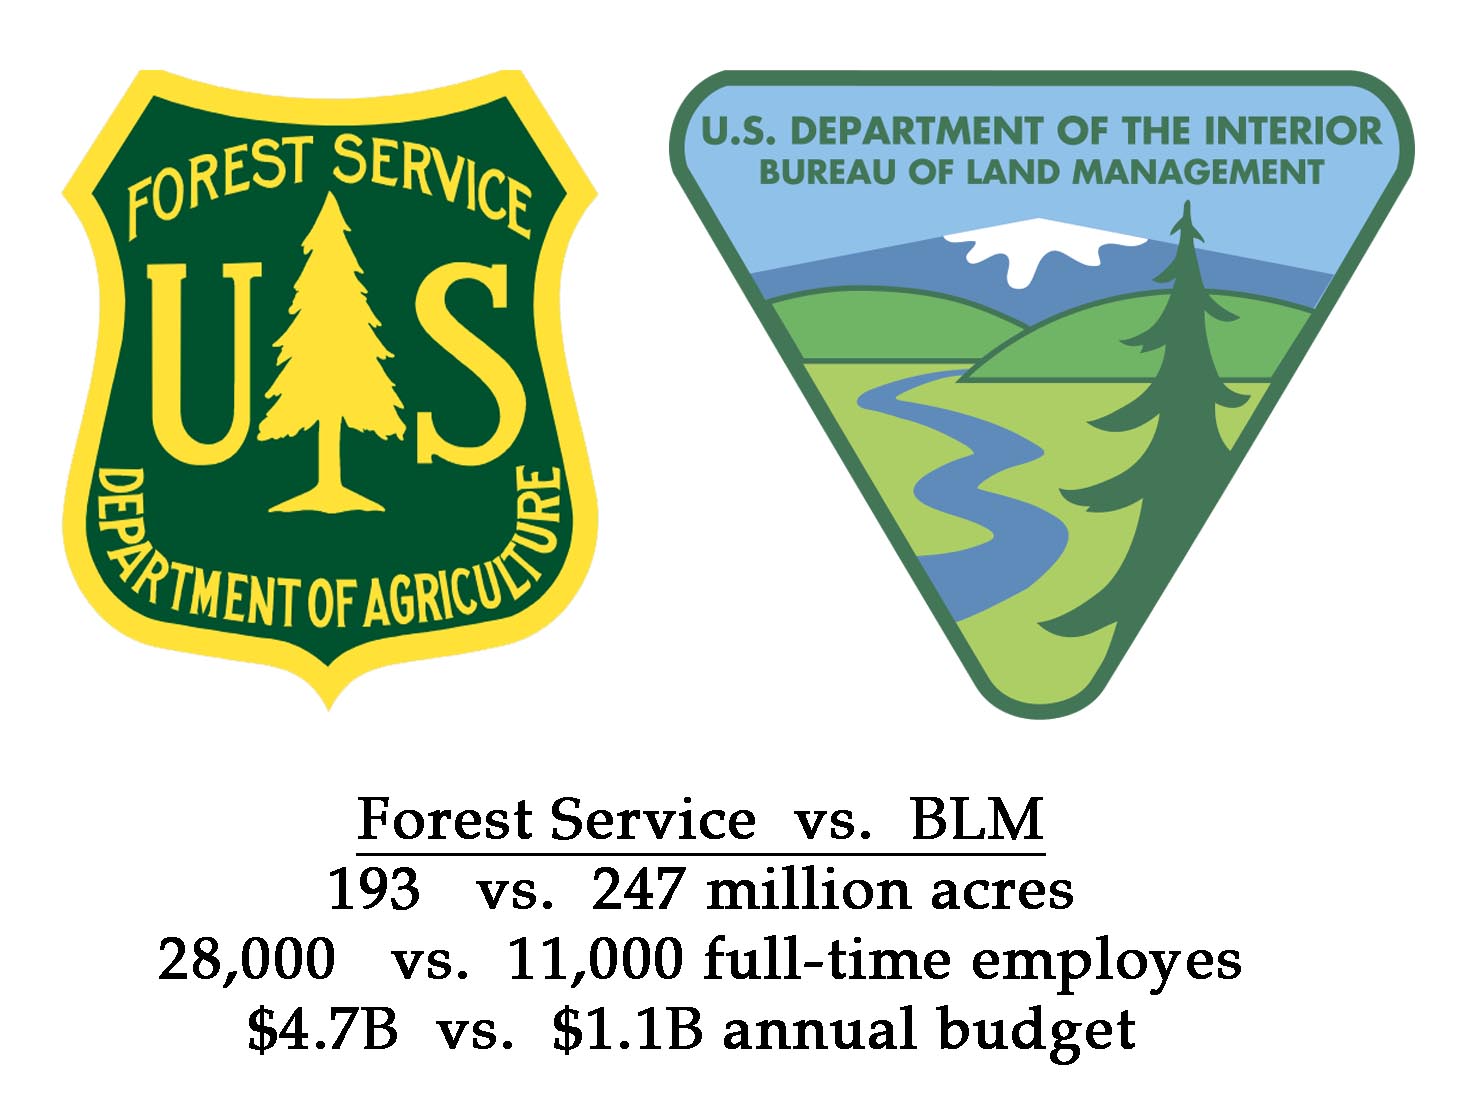 Comparing the Forest Service and BLM